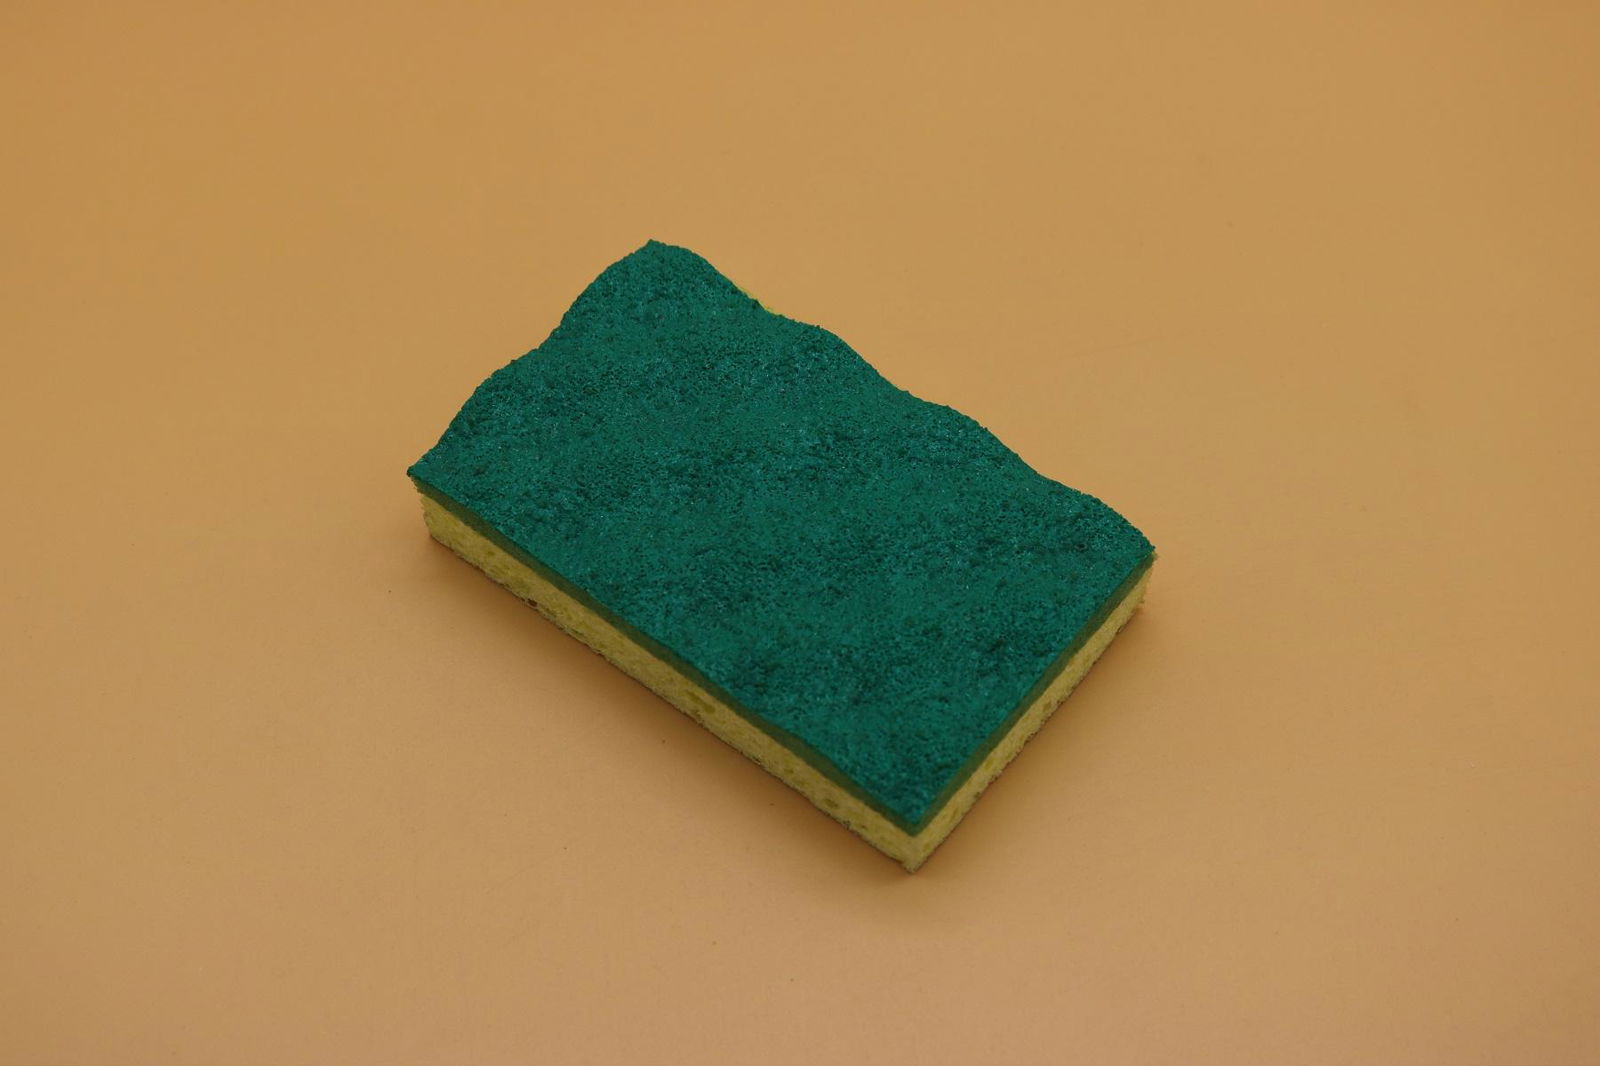 heavy duty cellulose sponge kitchen cleaning pad 2